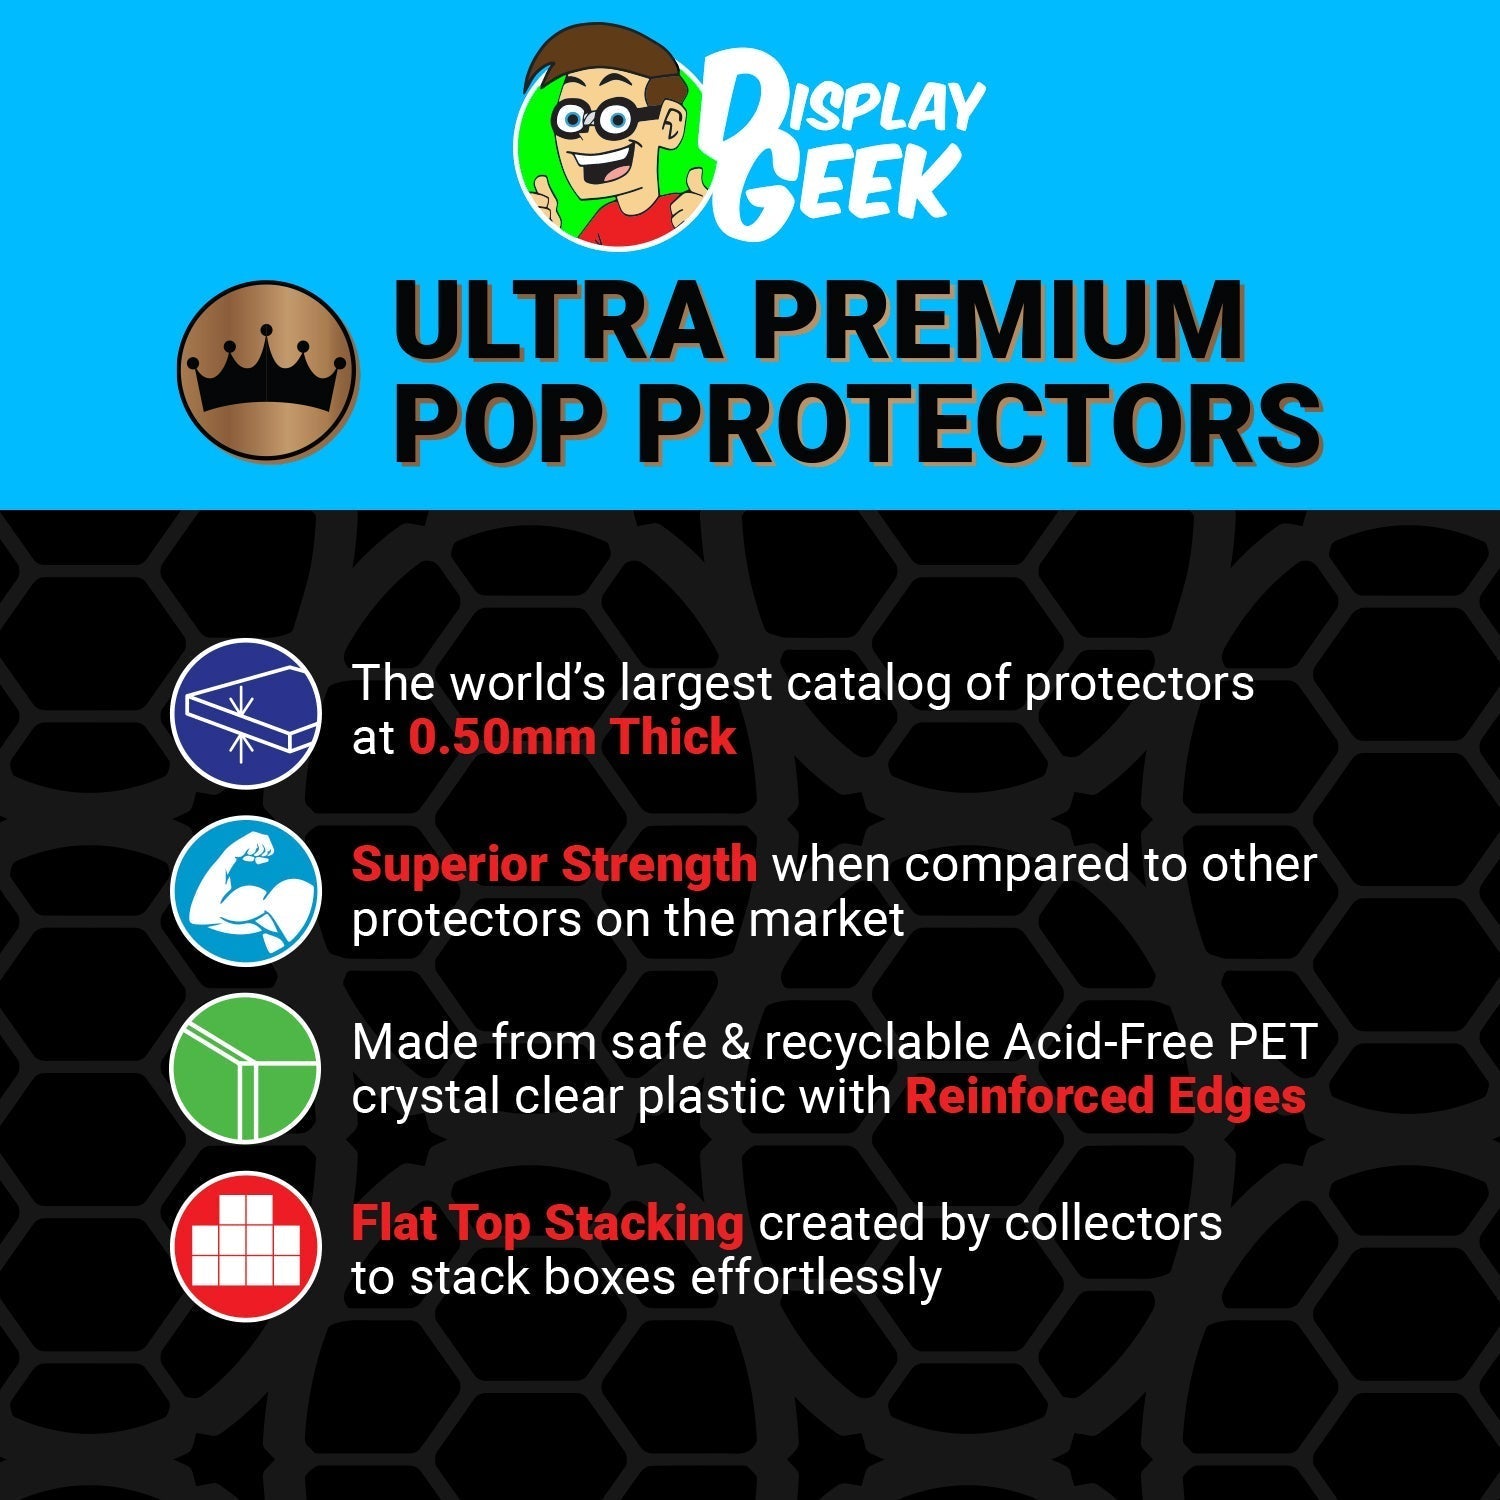 Pop Protector for U2 - Zoo TV Tour 1993 #05 Funko Pop Moment Deluxe - PPG Pop Protector Guide Search Created by Display Geek